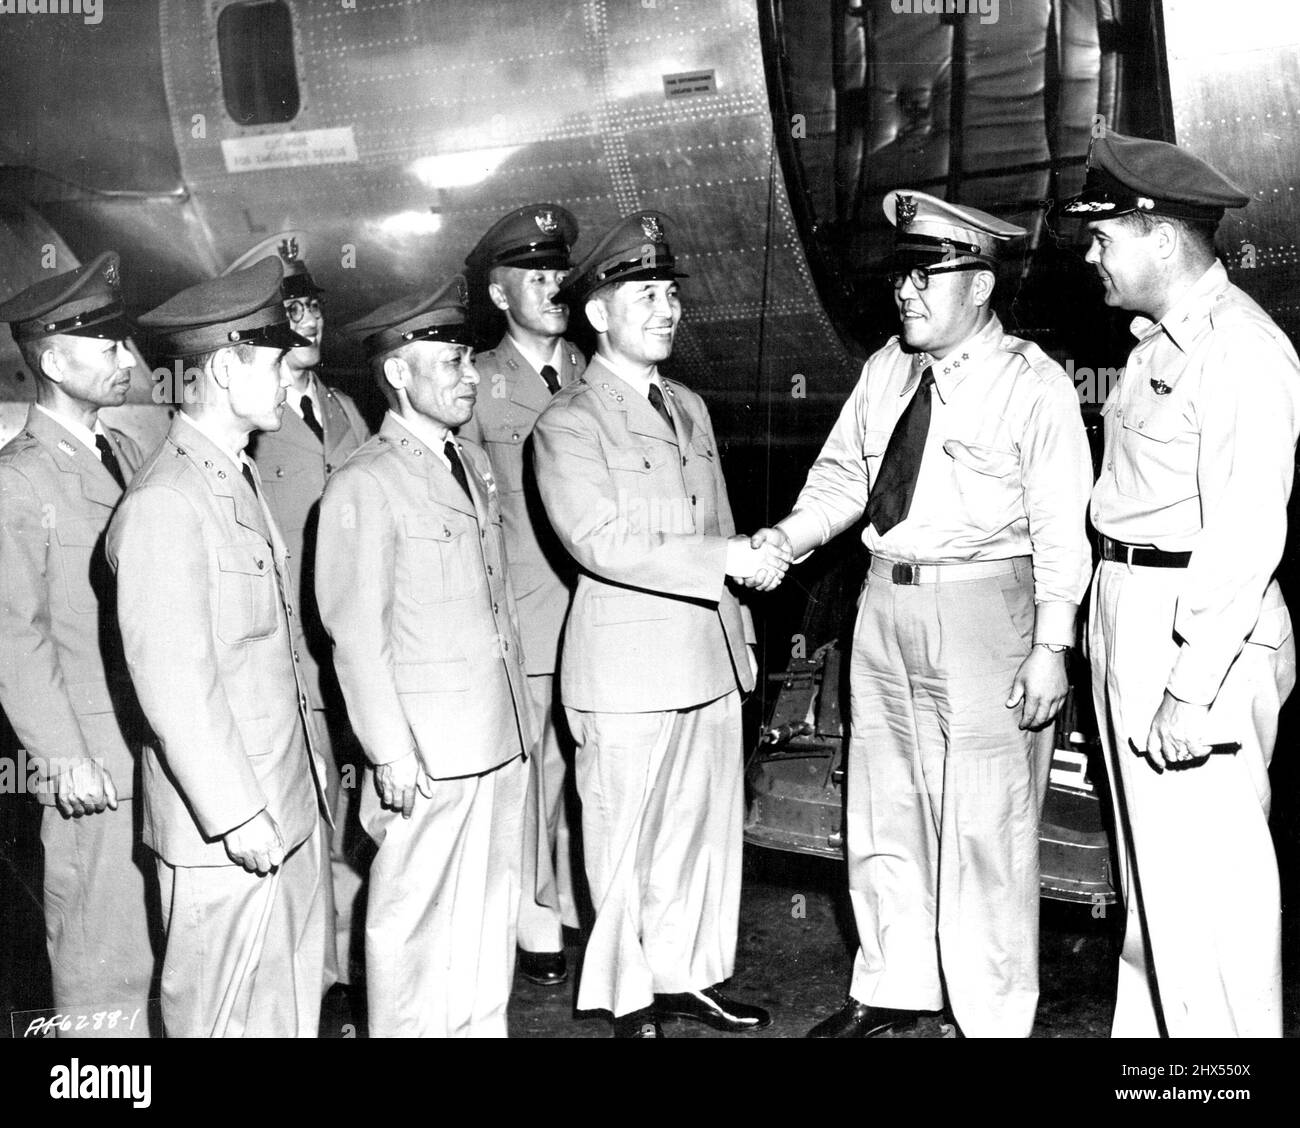 Japan Air Self Defence Force Officers Depart For The United States. Col. Eugene B. Le Bailly, Chief, U. S. Air Force Section, Military Assistance Advisory Group, Japan, (right) watches Lt. Gen. Kentaro Uemura (center), Chief of Staff of the Japan Air Self Defense Force, bid farewell to Lt. Gen. Sadsmu Sanagi, Deputy Chief of Staff, and five other high-ranking Japan Air Self Defense Force officers before their departure last night from Tokyo International Airport for a three-week staff orientation visit of U. S. Air Force bases in the United States. September 17, 1954. Stock Photo